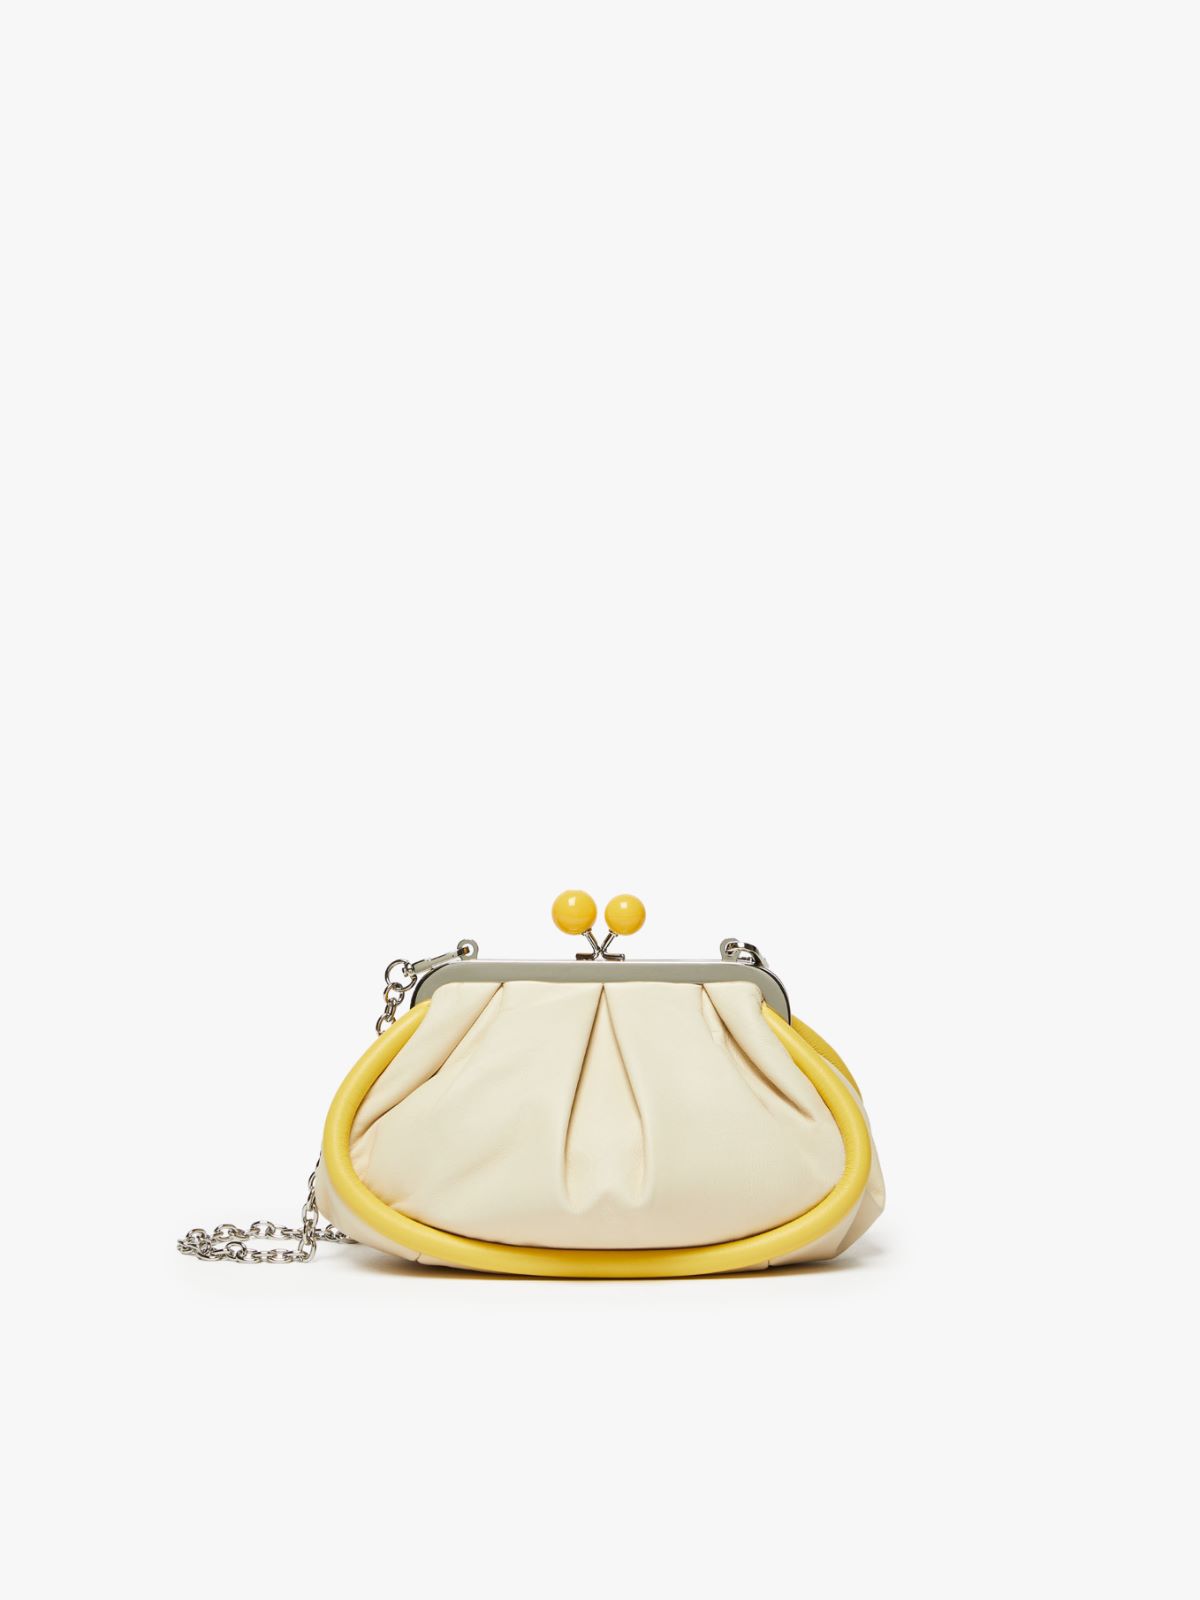 Small Nappa leather Pasticcino Bag, ivory | Weekend Max Mara